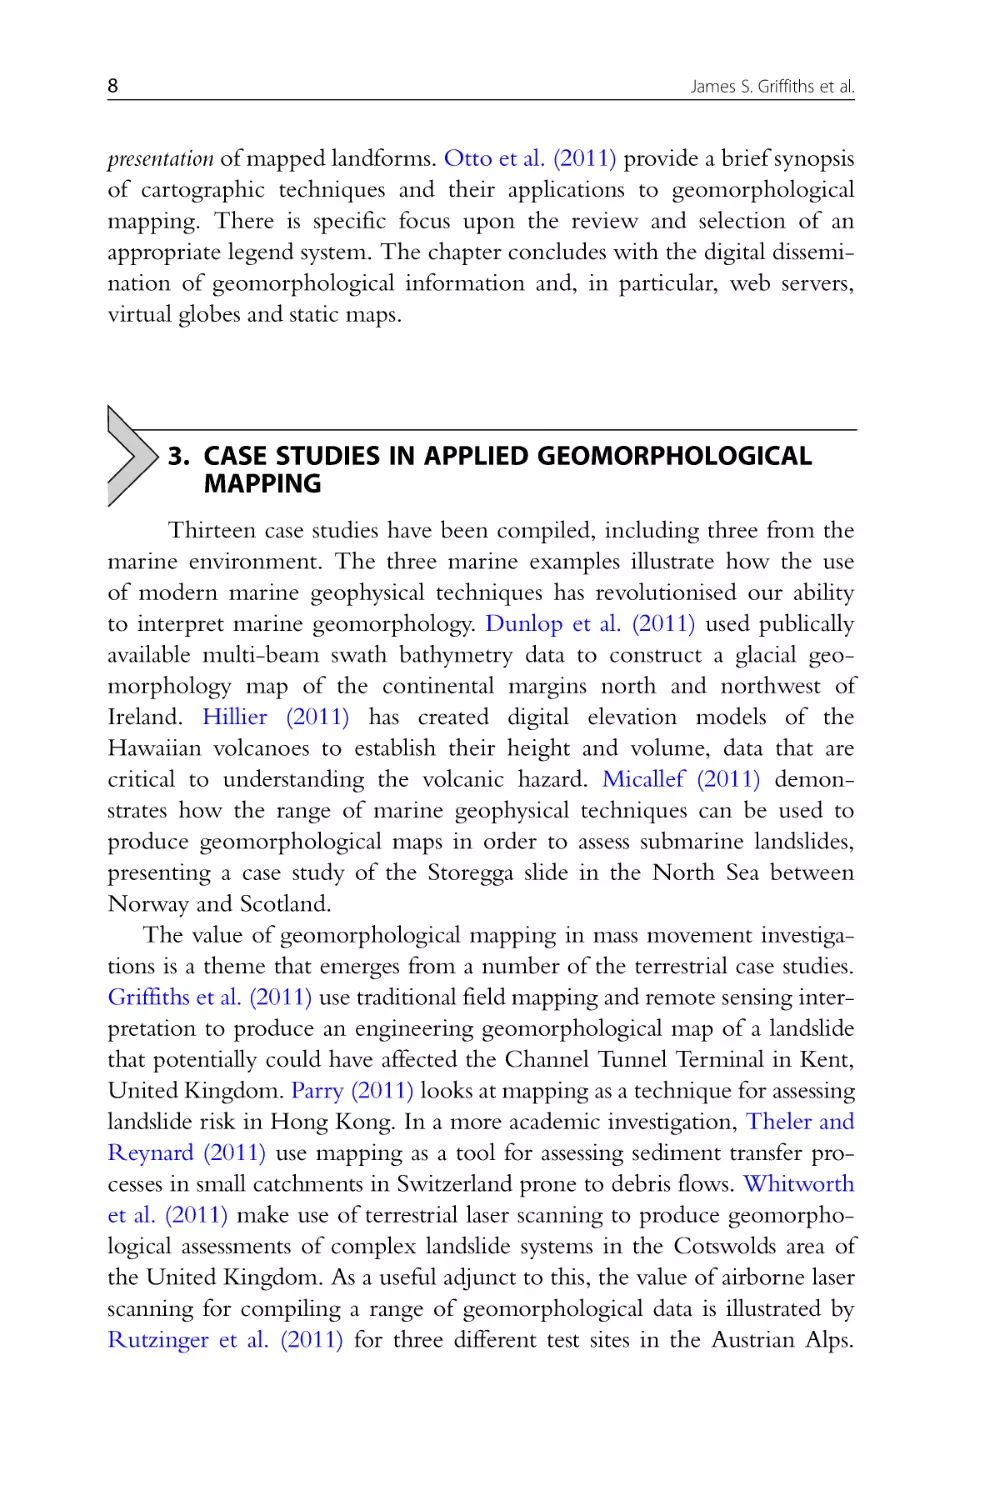 3. Case Studies in Applied Geomorphological Mapping